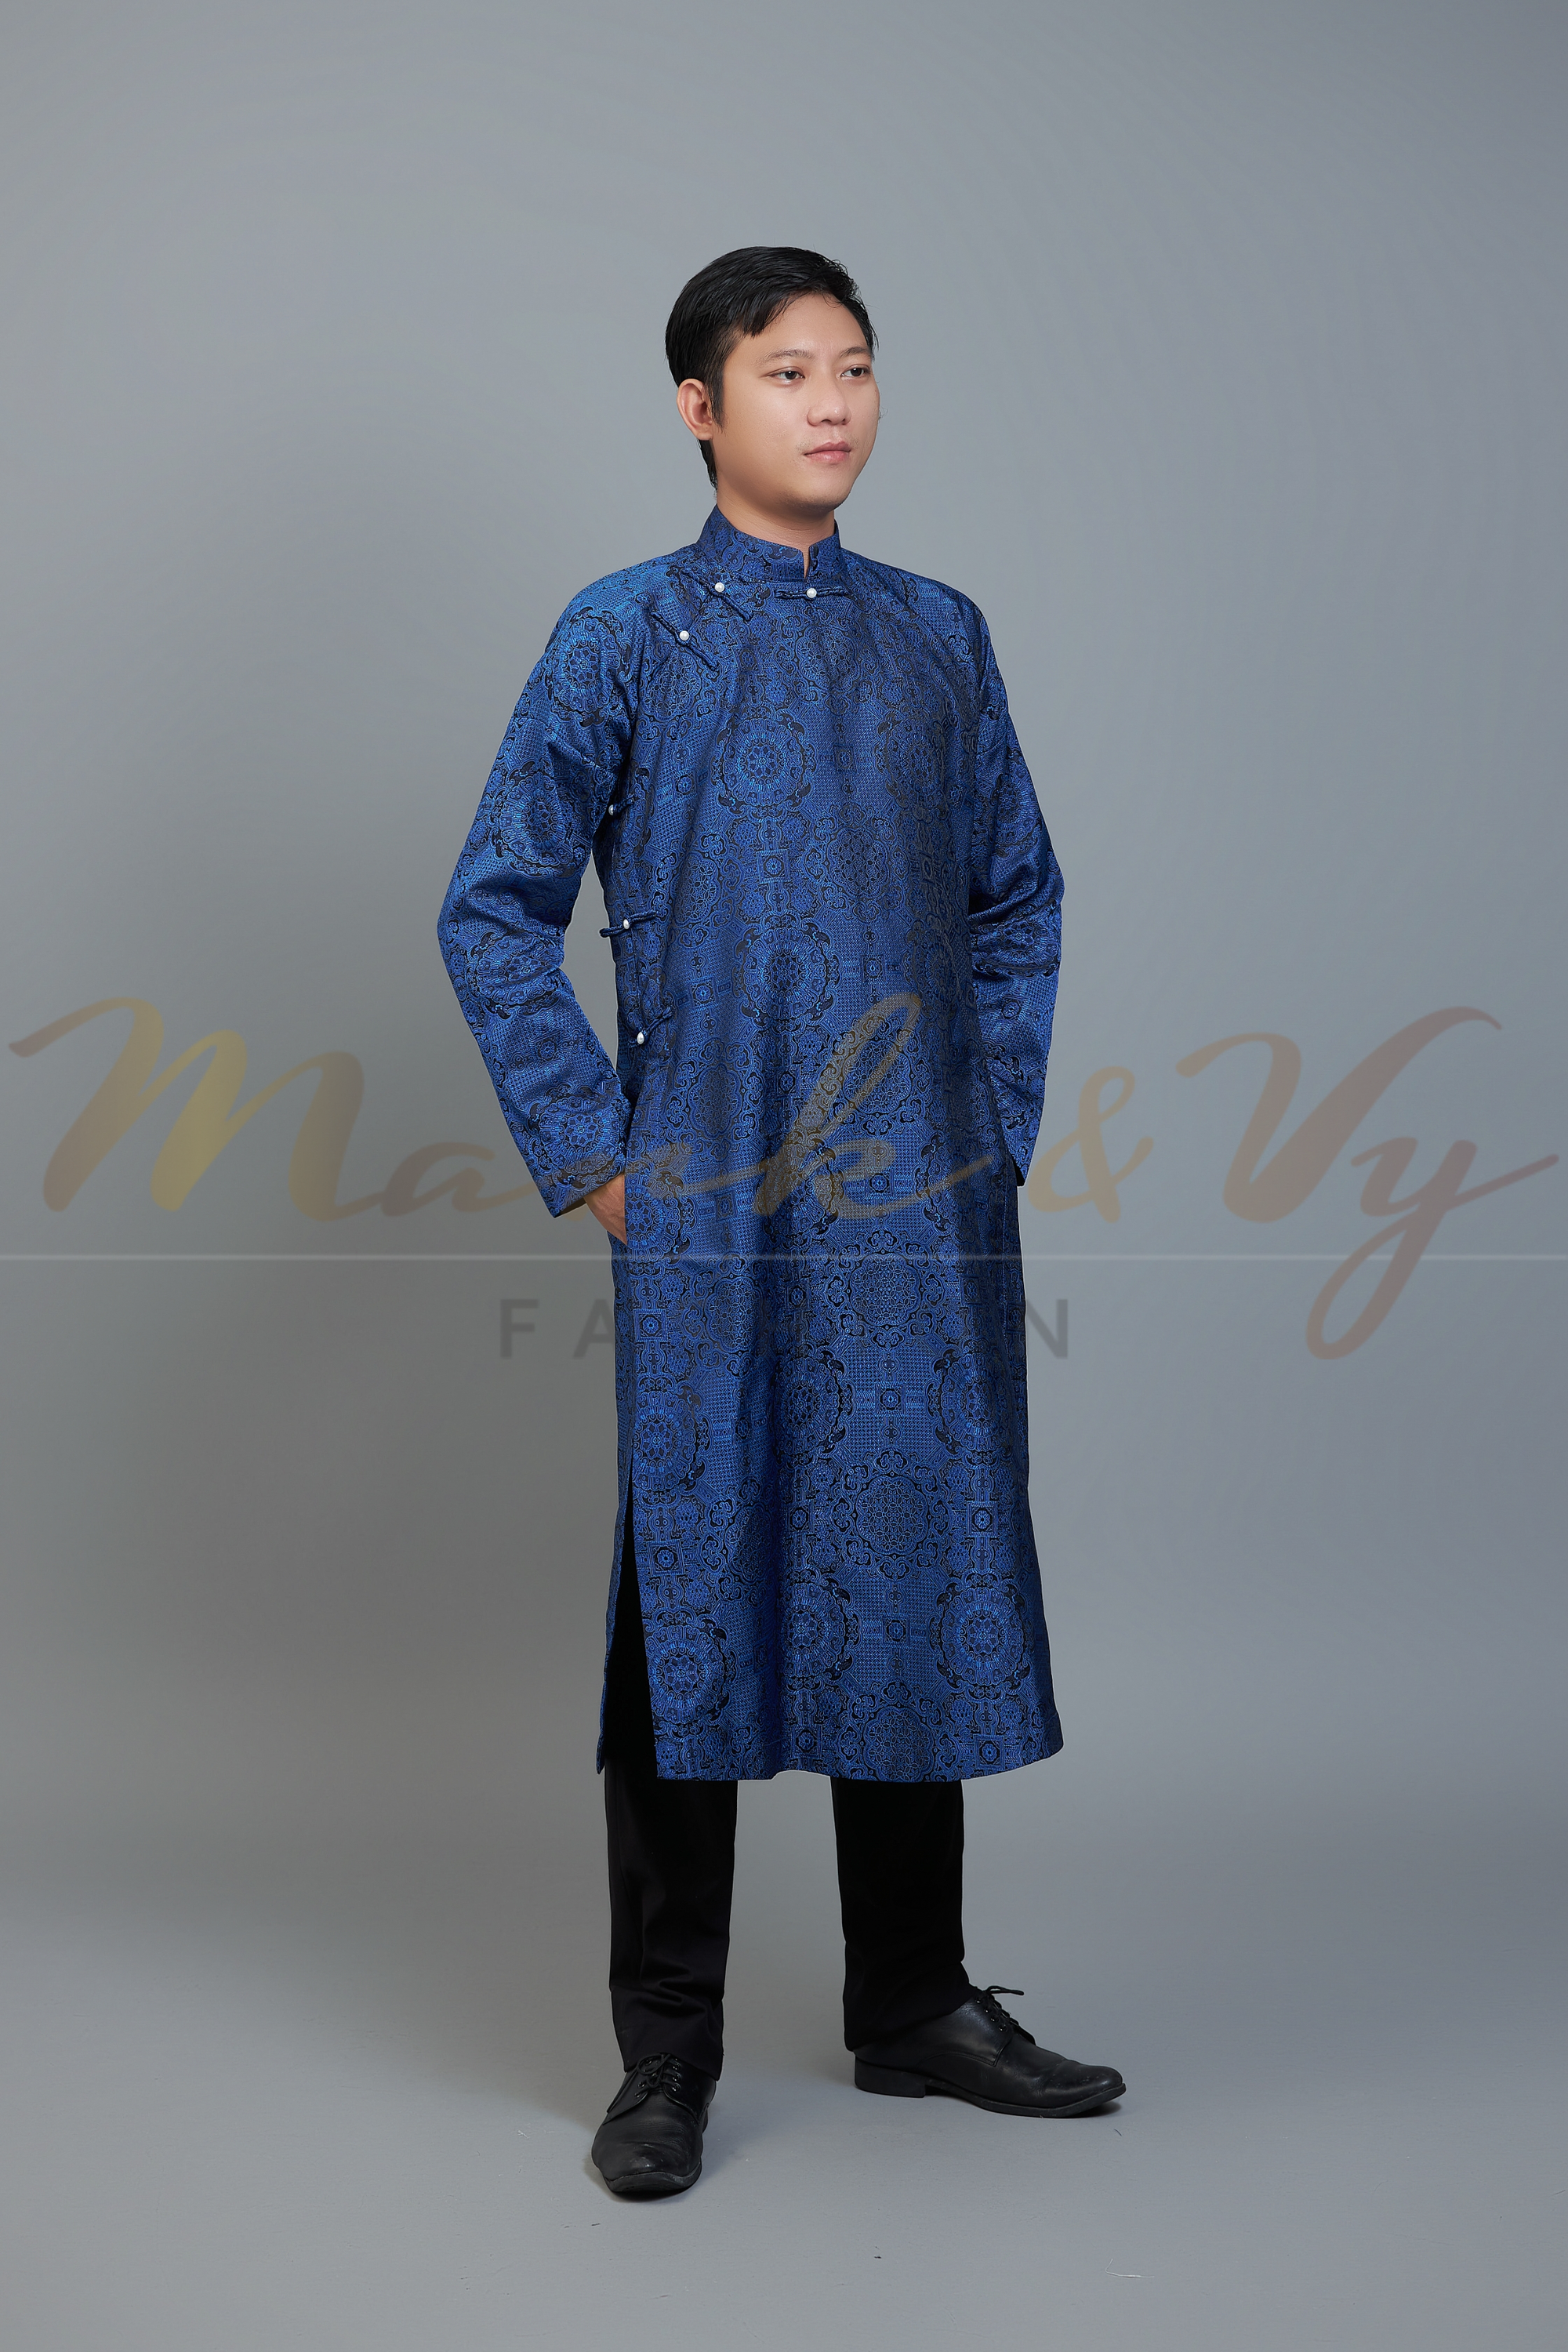 Men's ao dai in blue and black fabric - Vietnamese national clothing. Free custom fit.